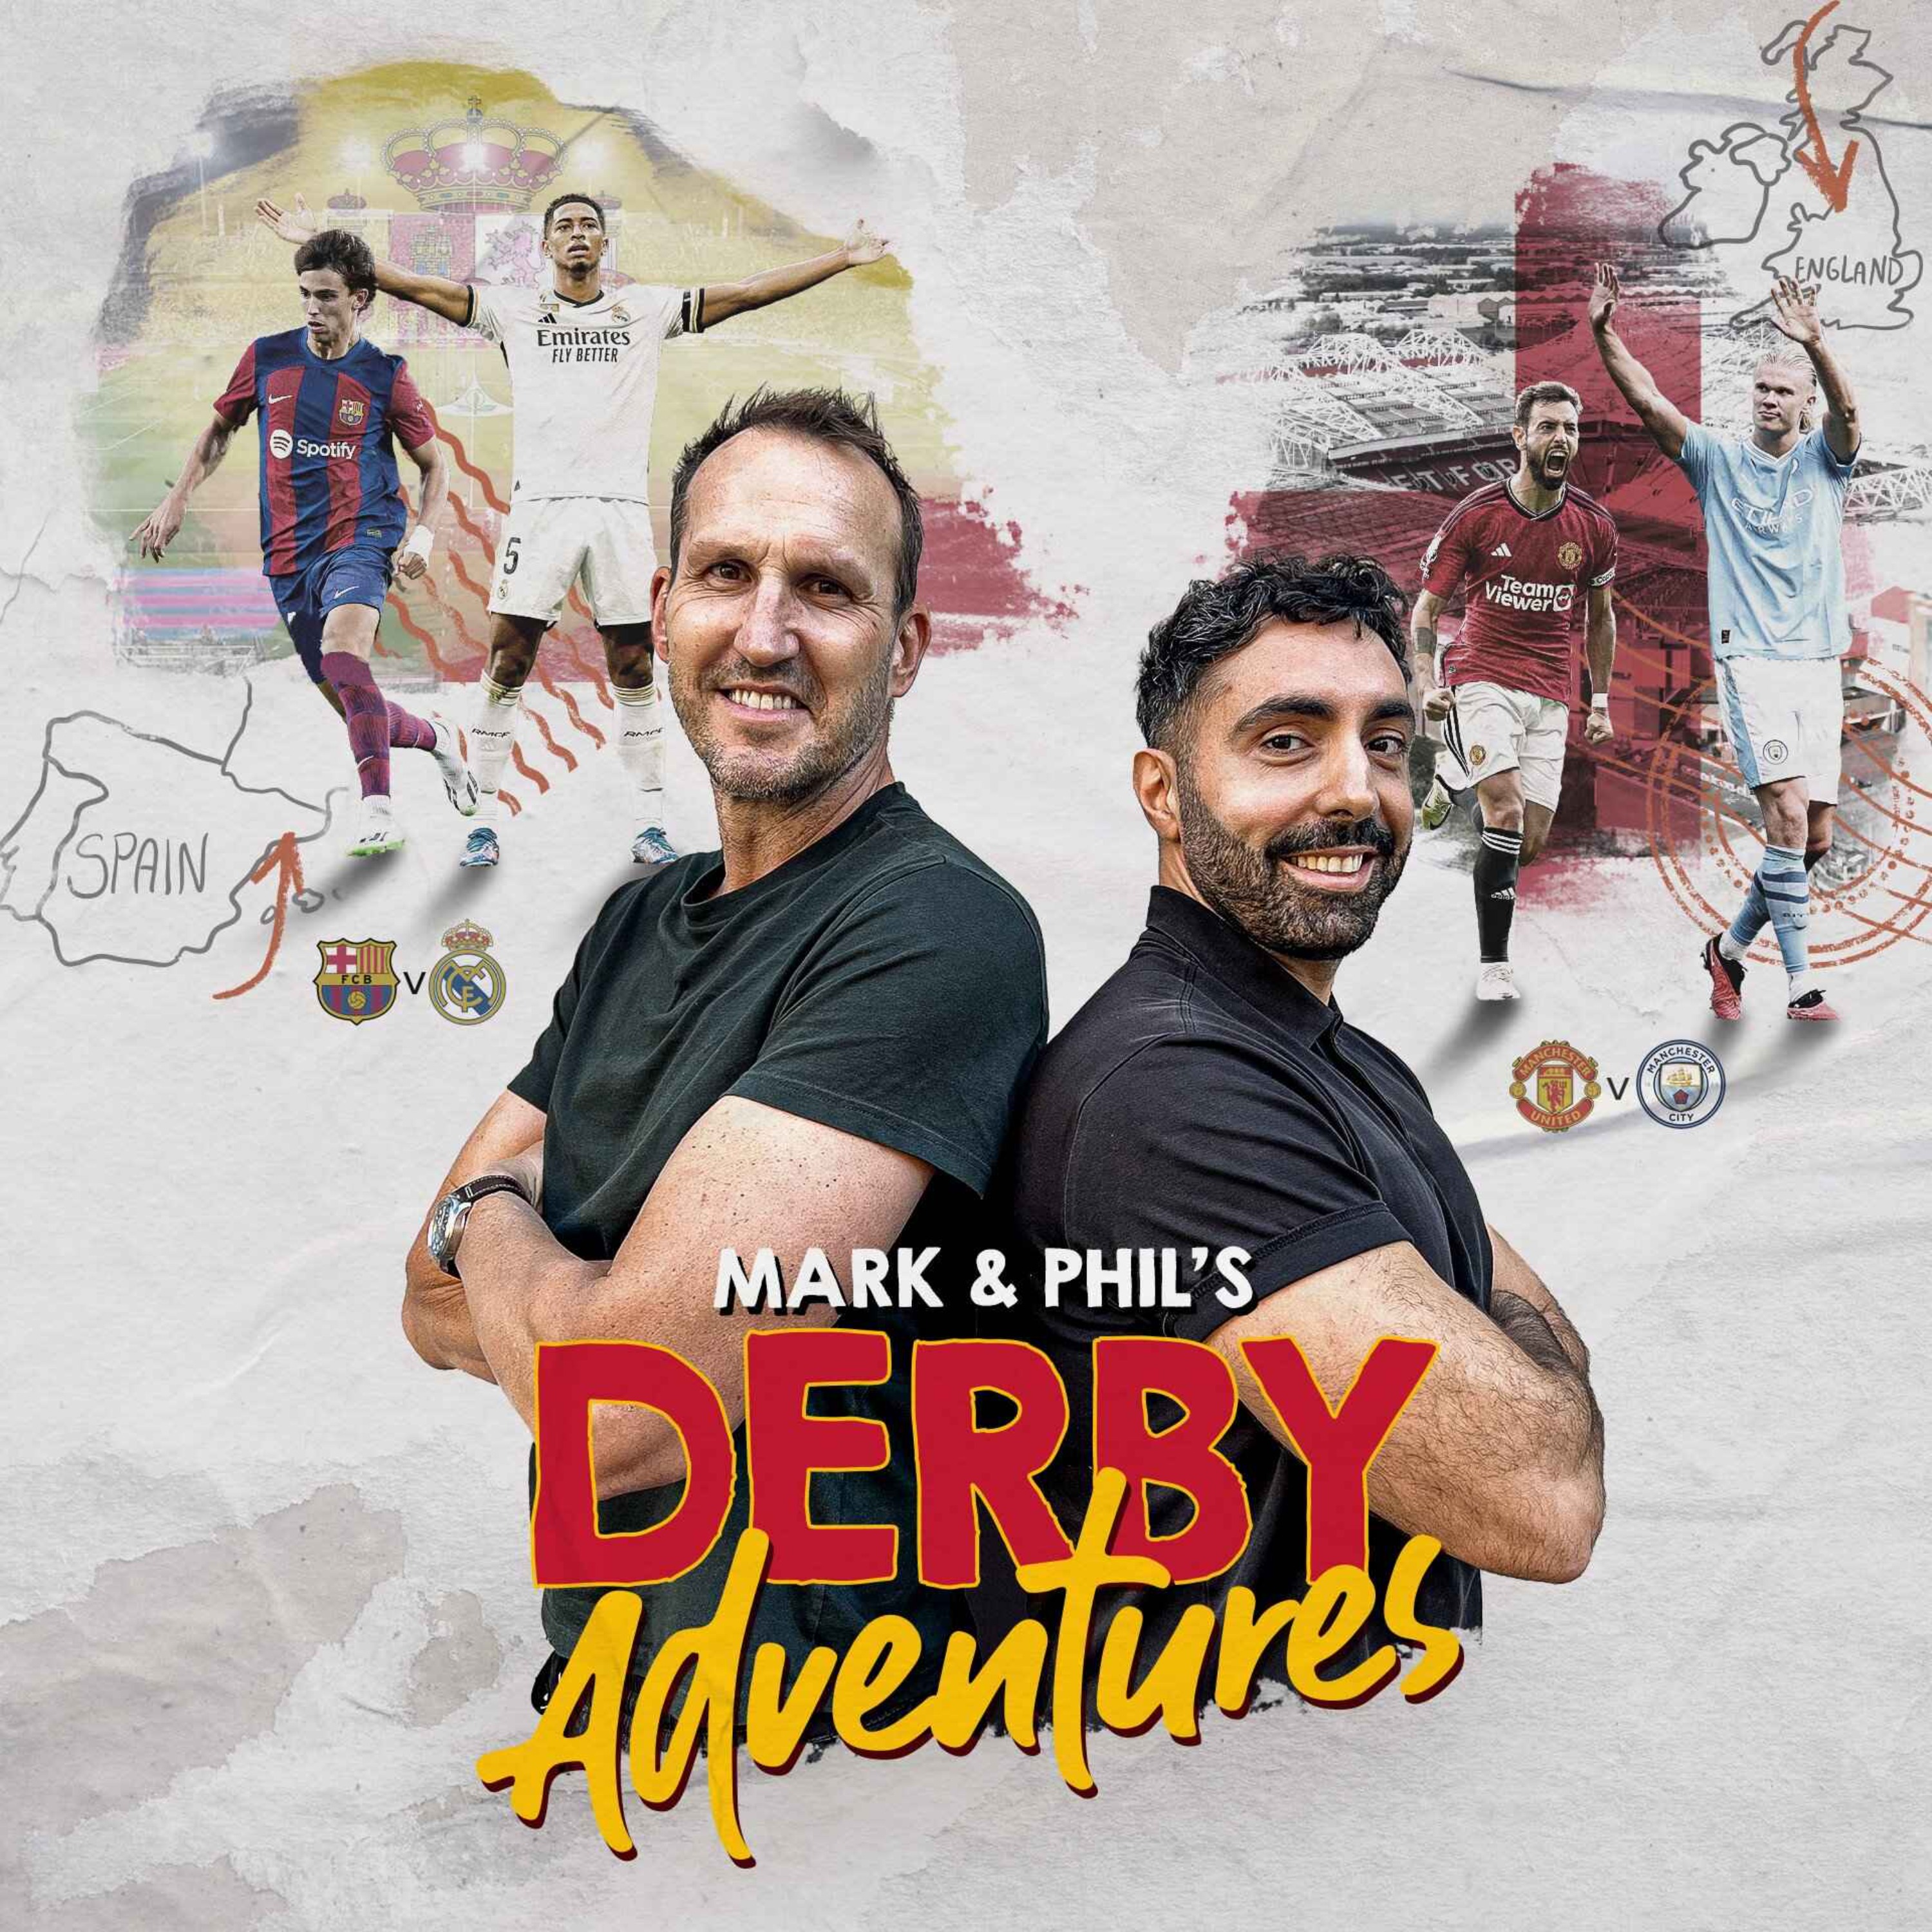 El Clásico AND Manchester derby in 24 hours!? | Mark and Phil’s Derby Adventures